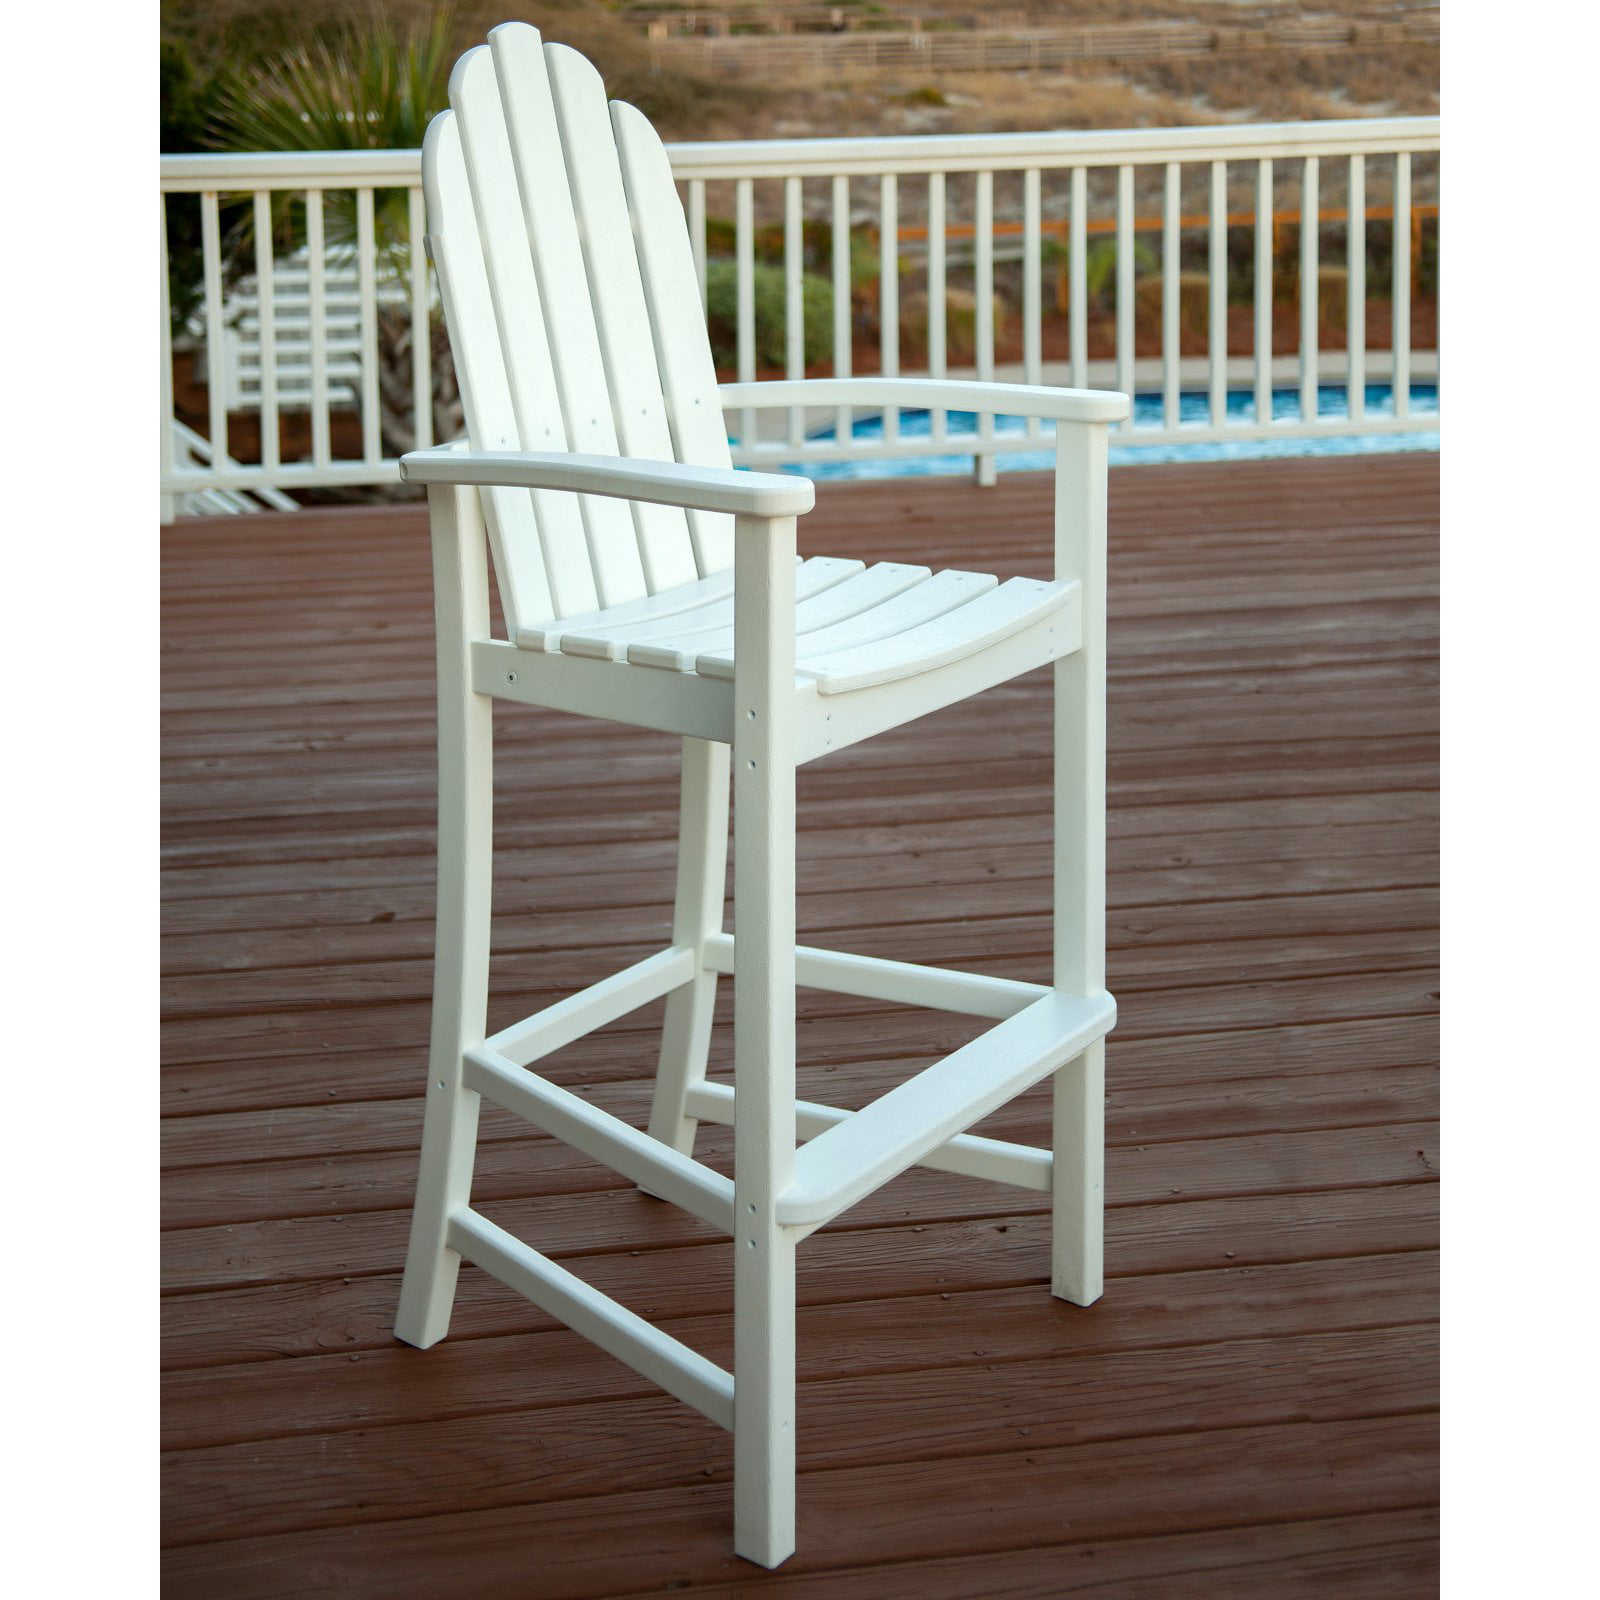 POLYWOOD® Adirondack Recycled Plastic Bar Height Chair